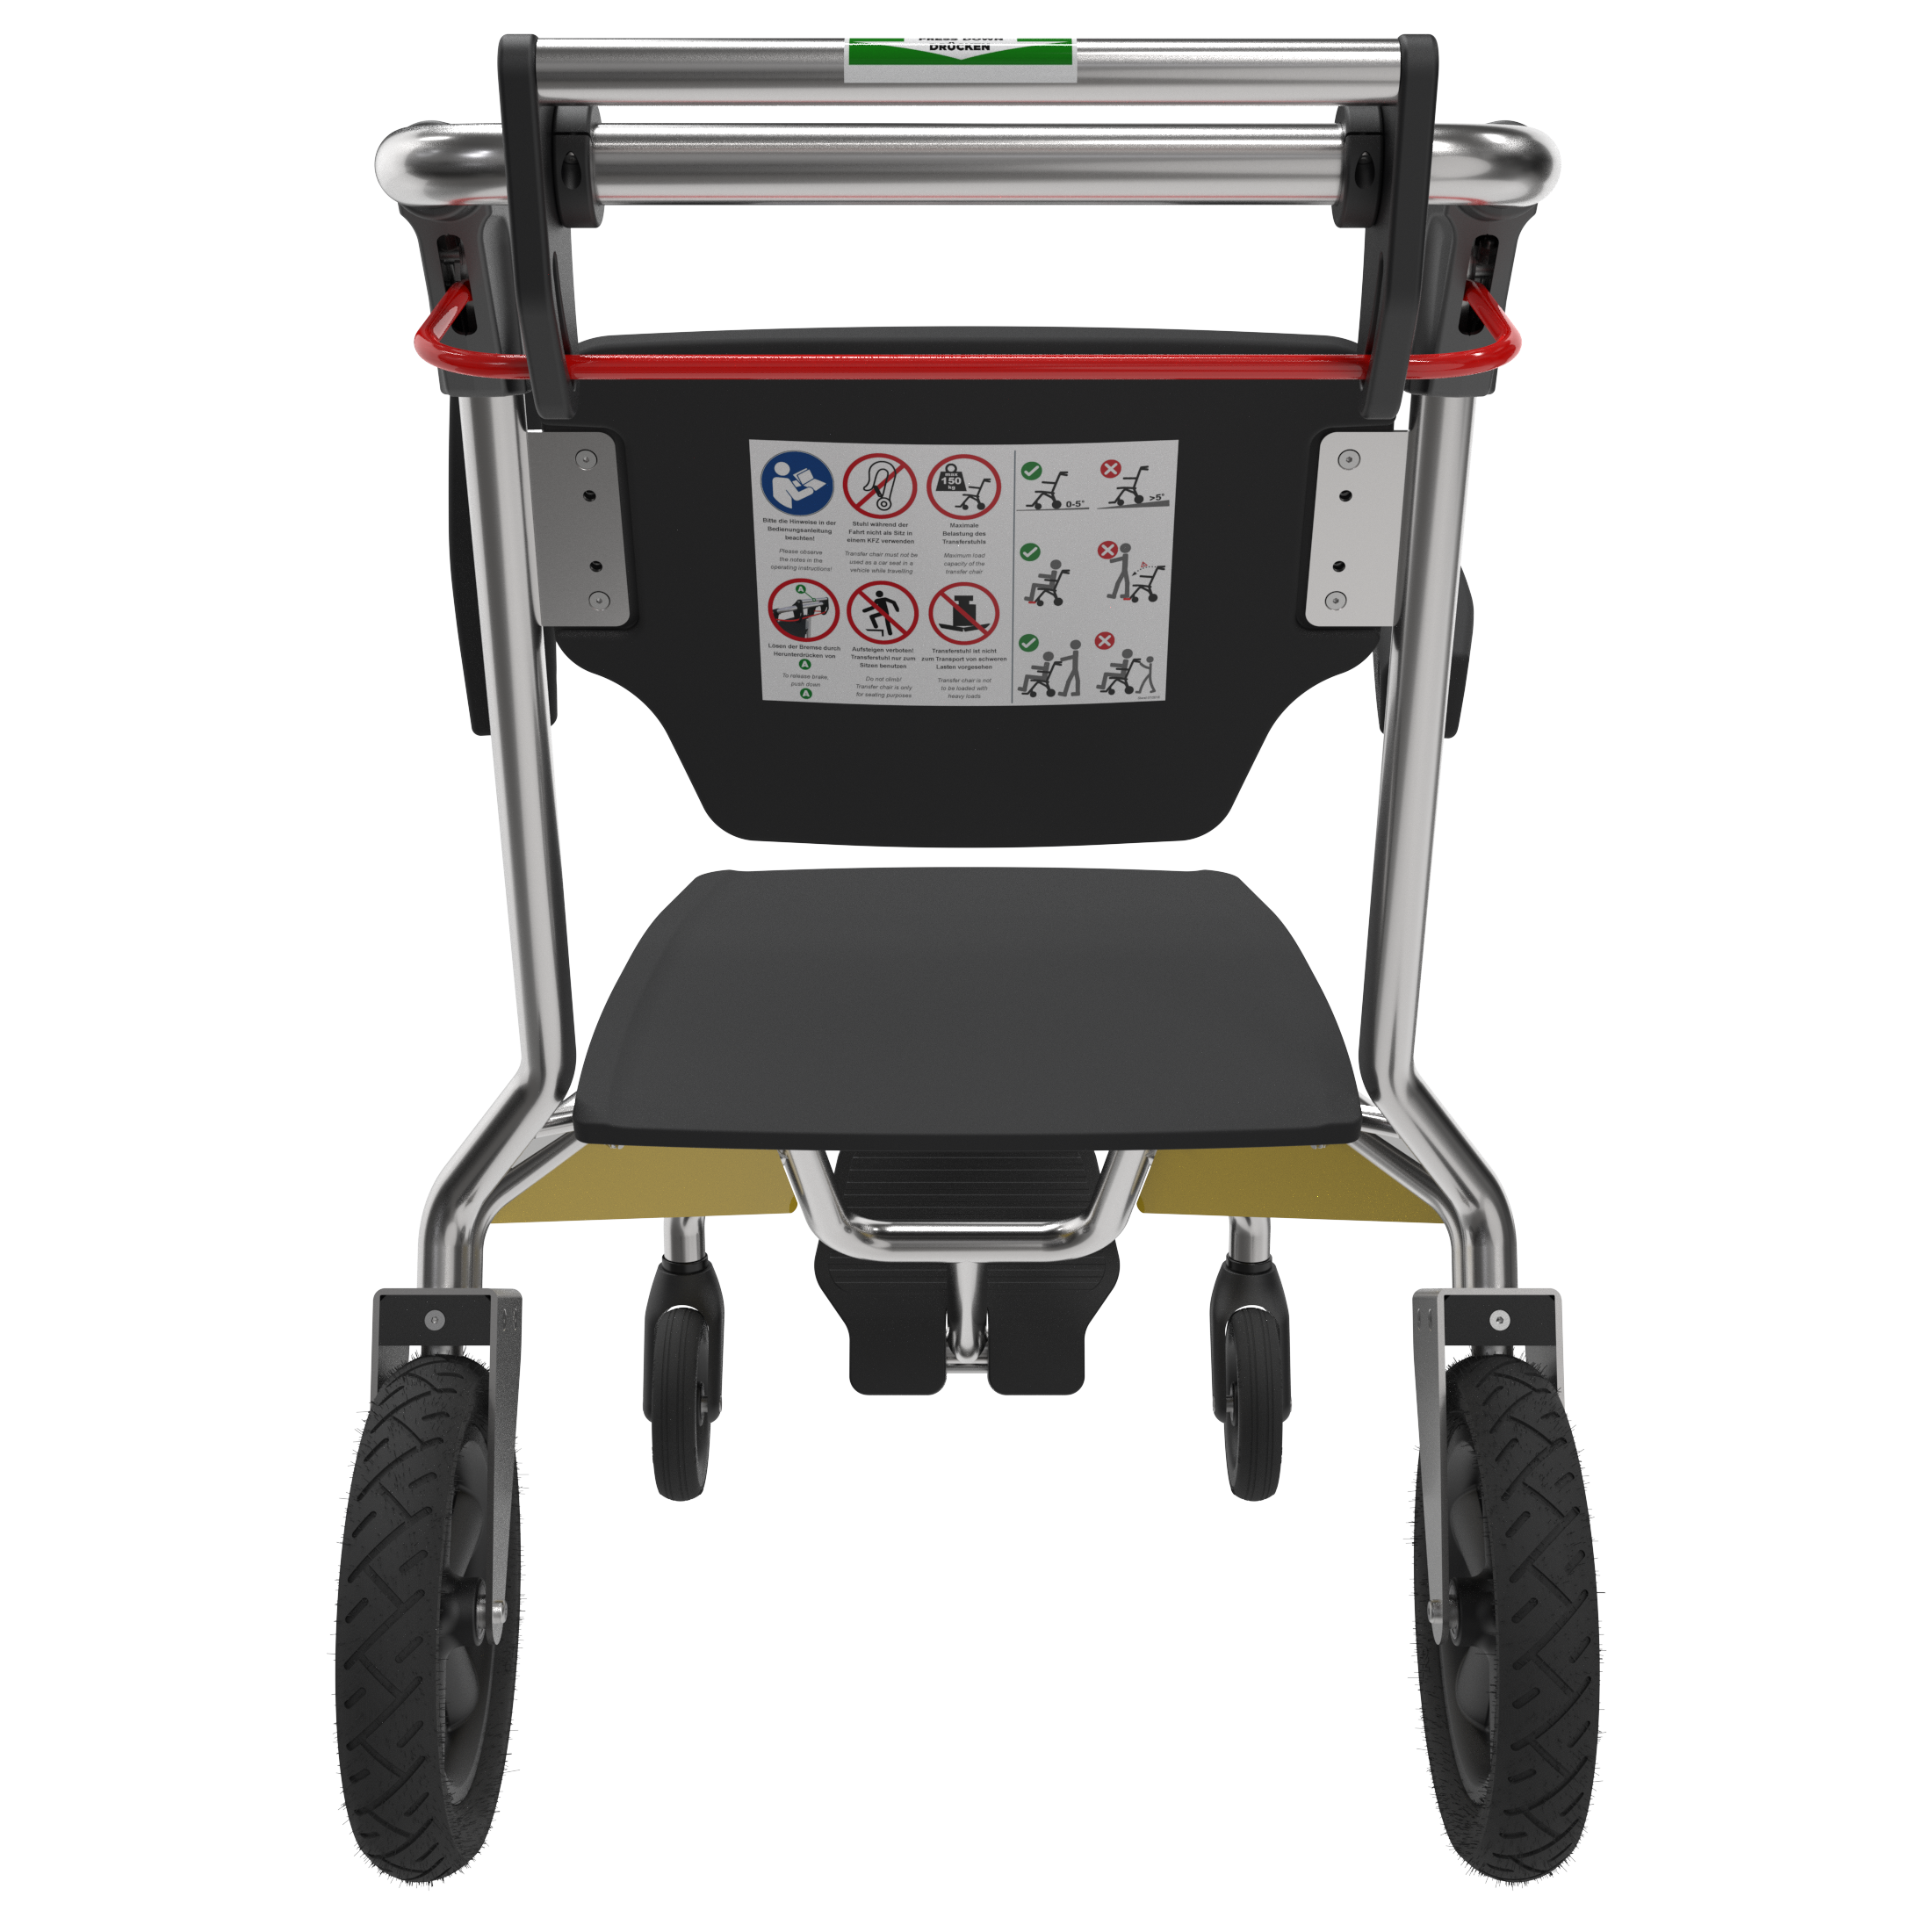 SAM - Mobile Patient Transfer Chair